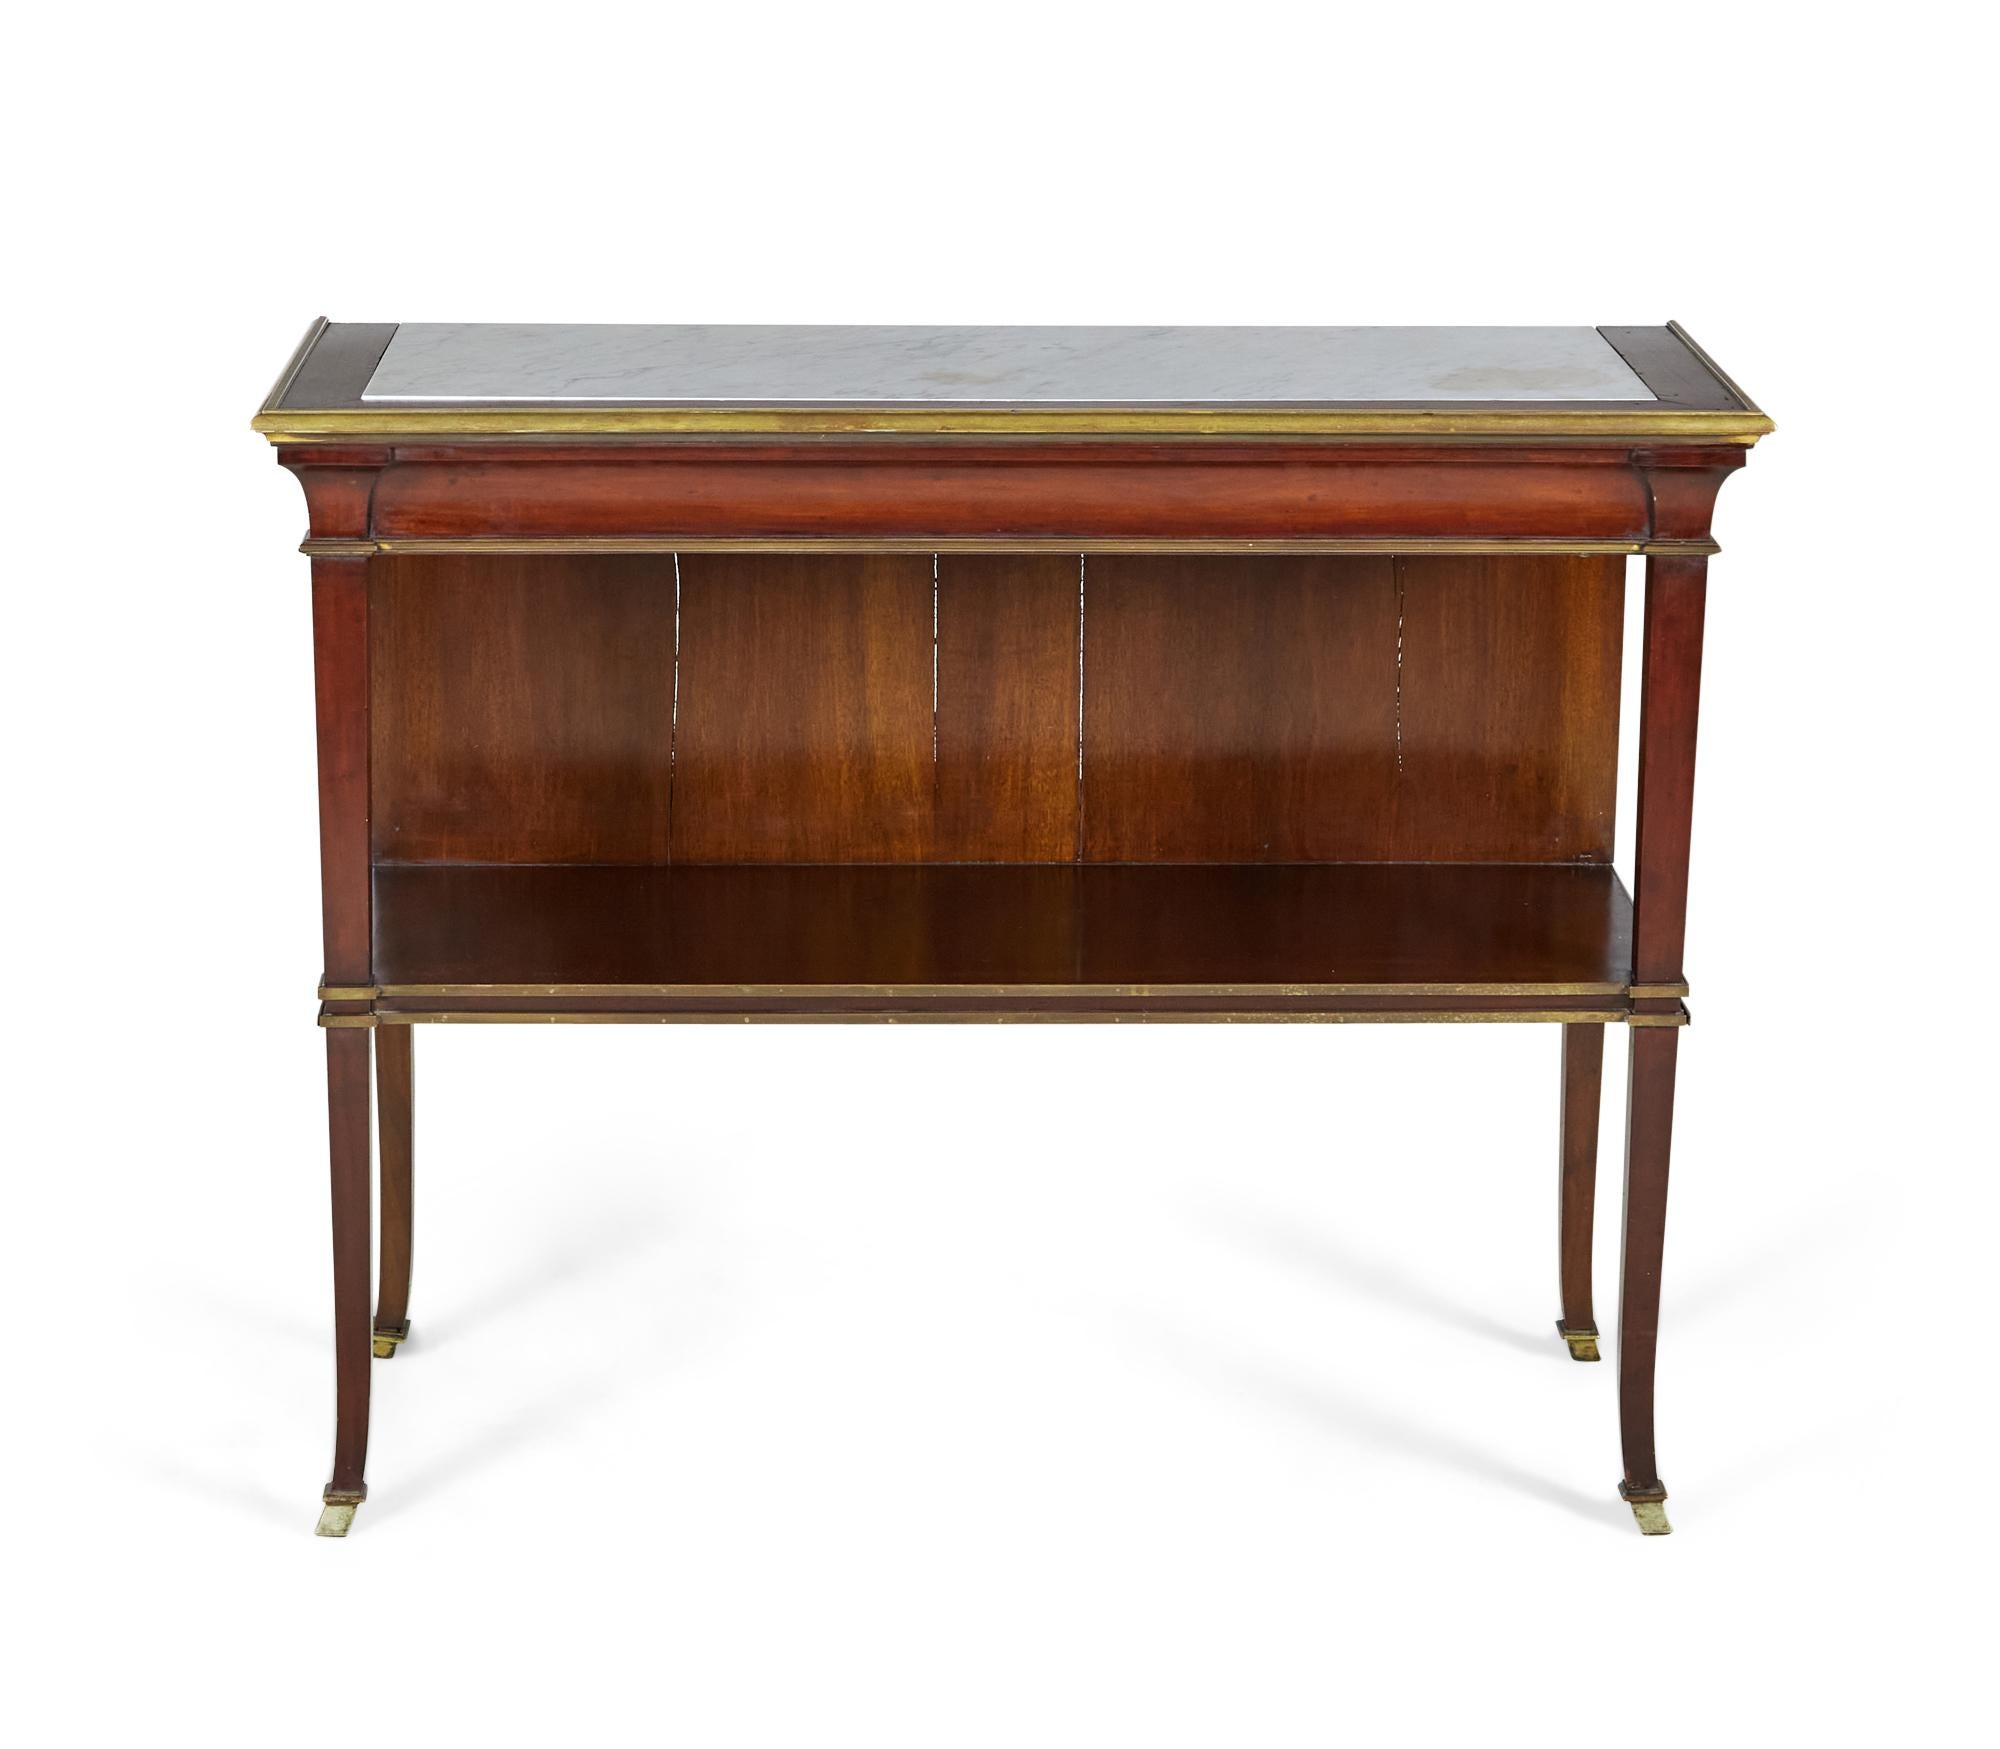 Pair of French mid-century Louis XVI style (circa 1940s) mahogany console tables having a solid back ending in a shelf with a white inset marble top and bronze trim and sabots (manner of MAISON JANSEN) (priced as pair).
        